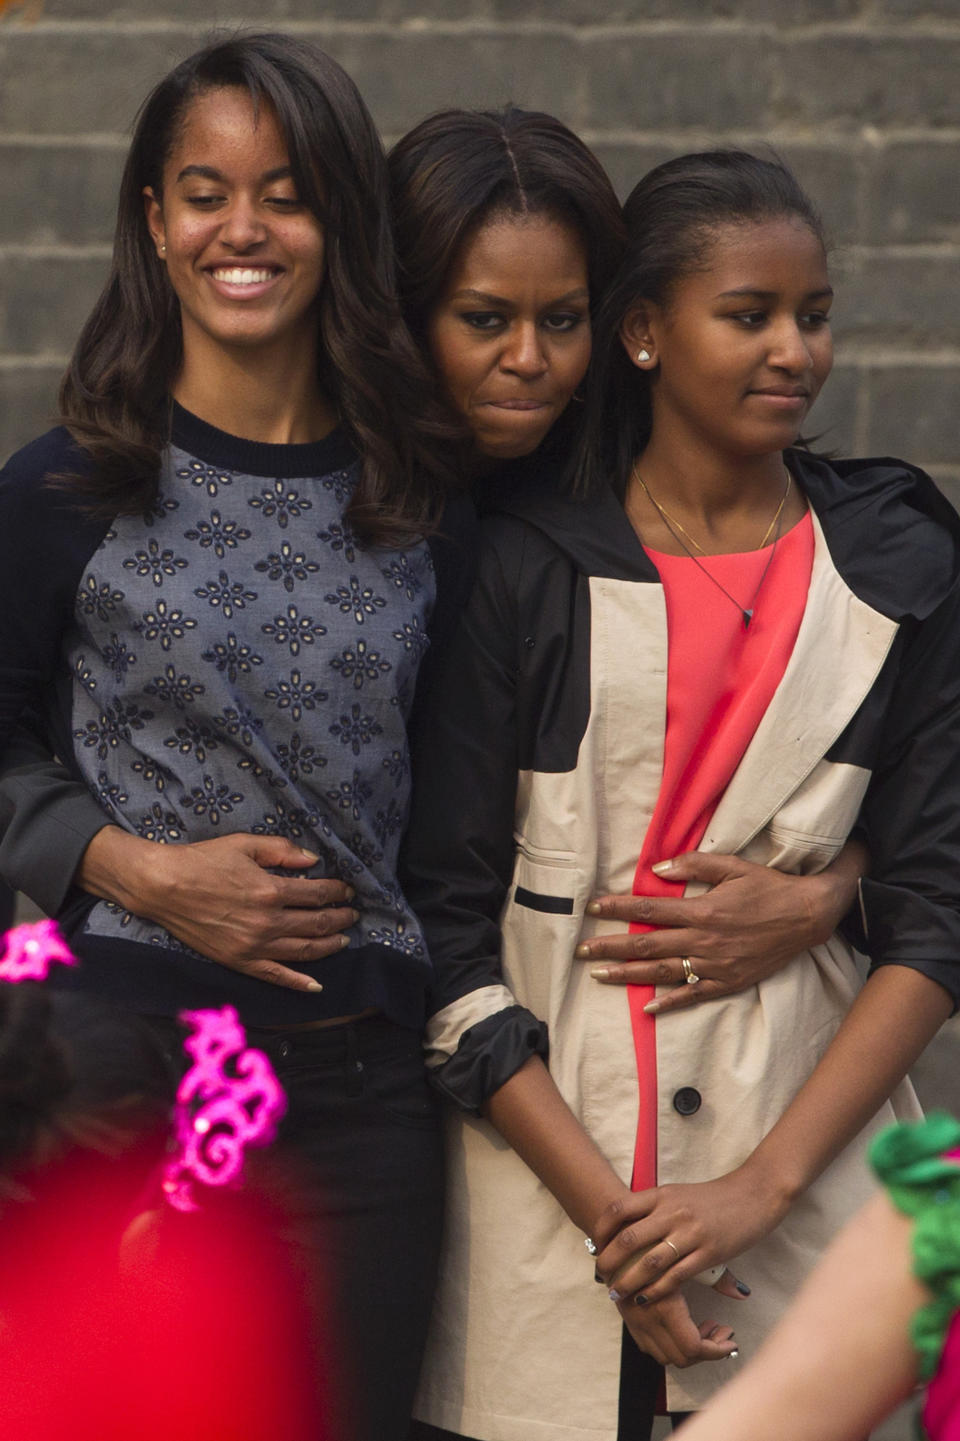 First lady Michelle Obama hugs her daughters Malia and Sasha when they watch a performance during their visit to an ancient city wall in Xi'an, in northwestern China's Shaanxi province, Monday, March 24, 2014.